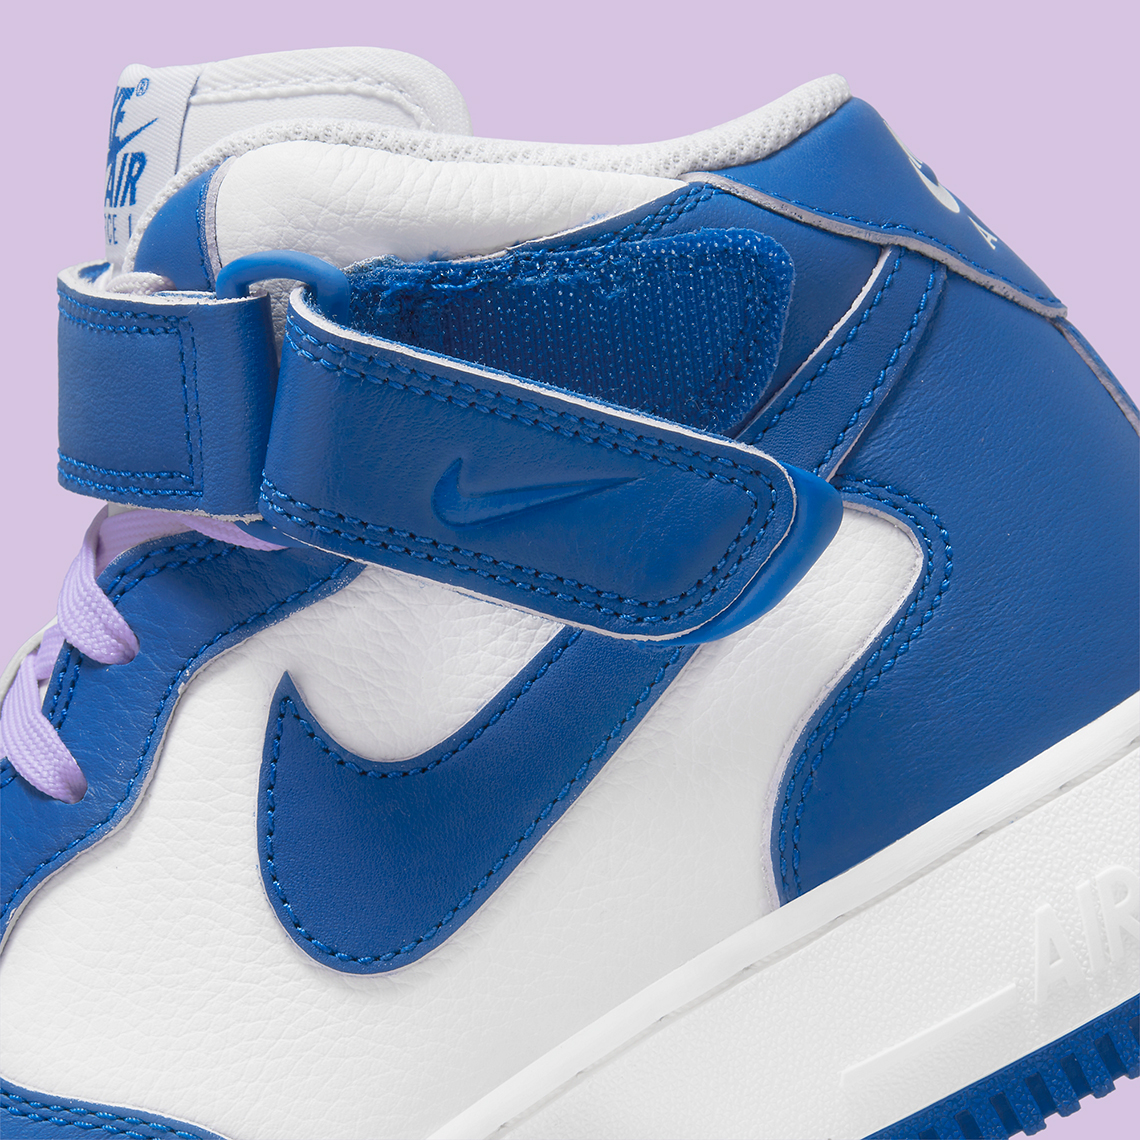 nike air force 1 mid royal blue white dx3721 100 8